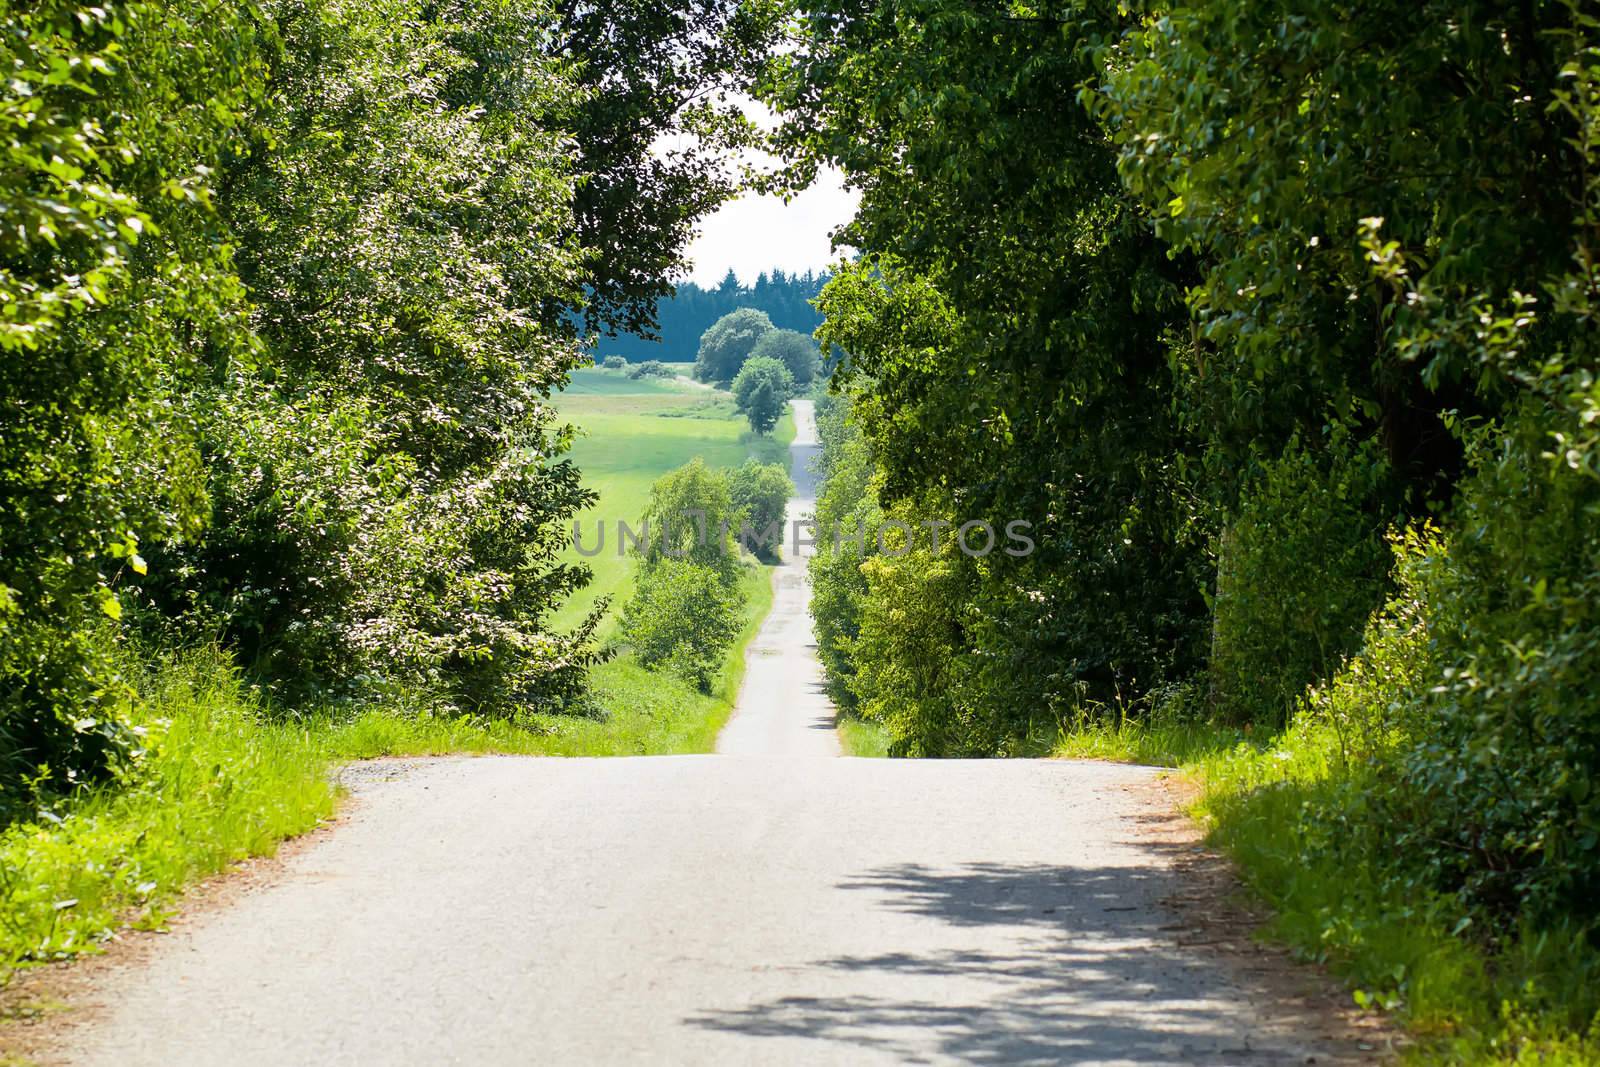 Summer scenery of a village road lined with green trees